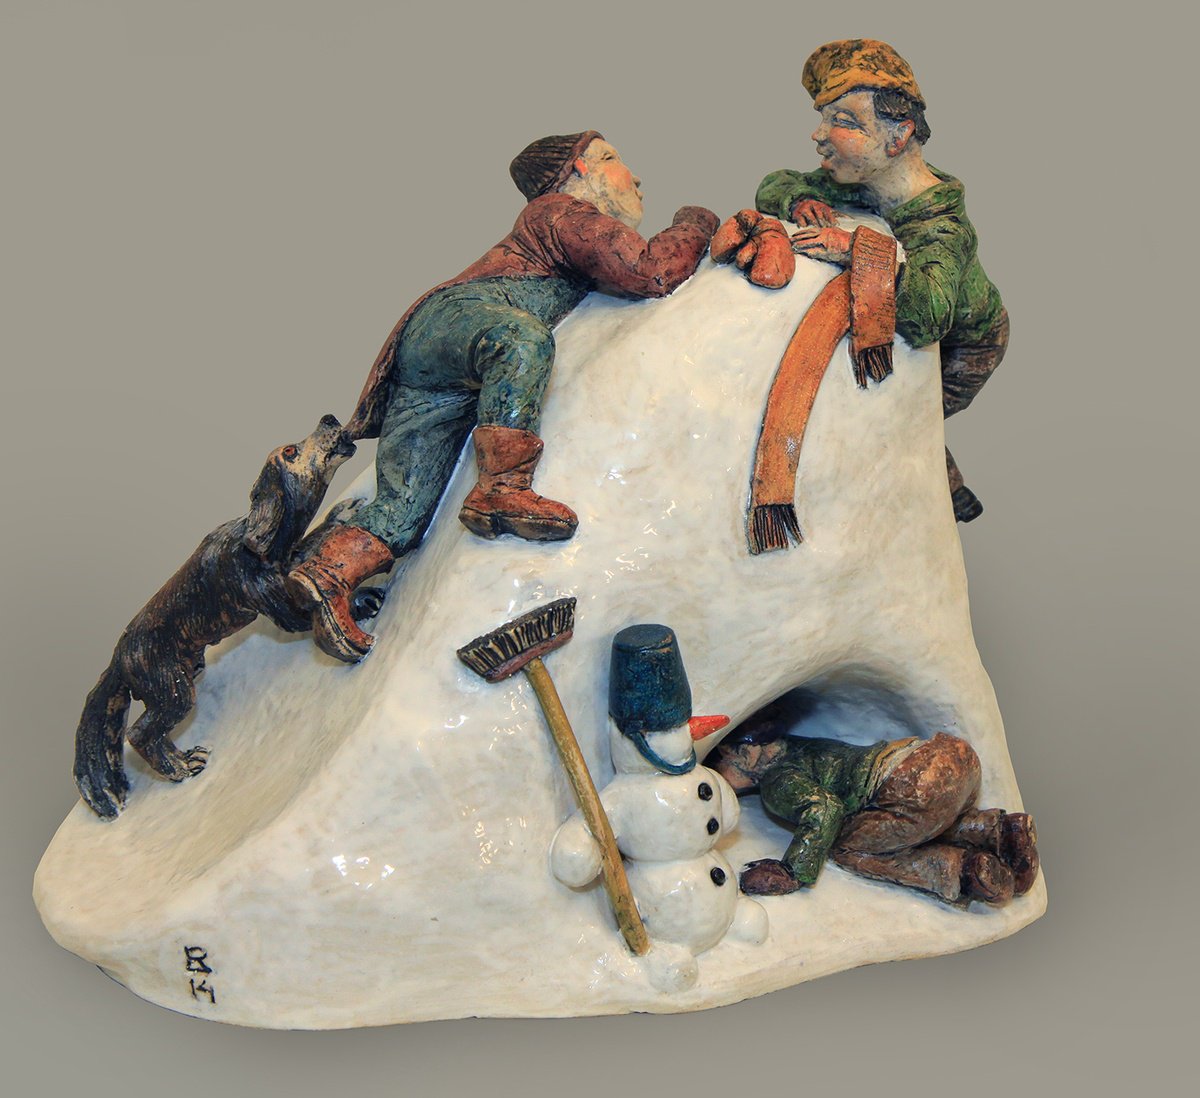 Ceramic | Sculpture | Hill | Art from Lithuania by Ricardas Lukosiunas